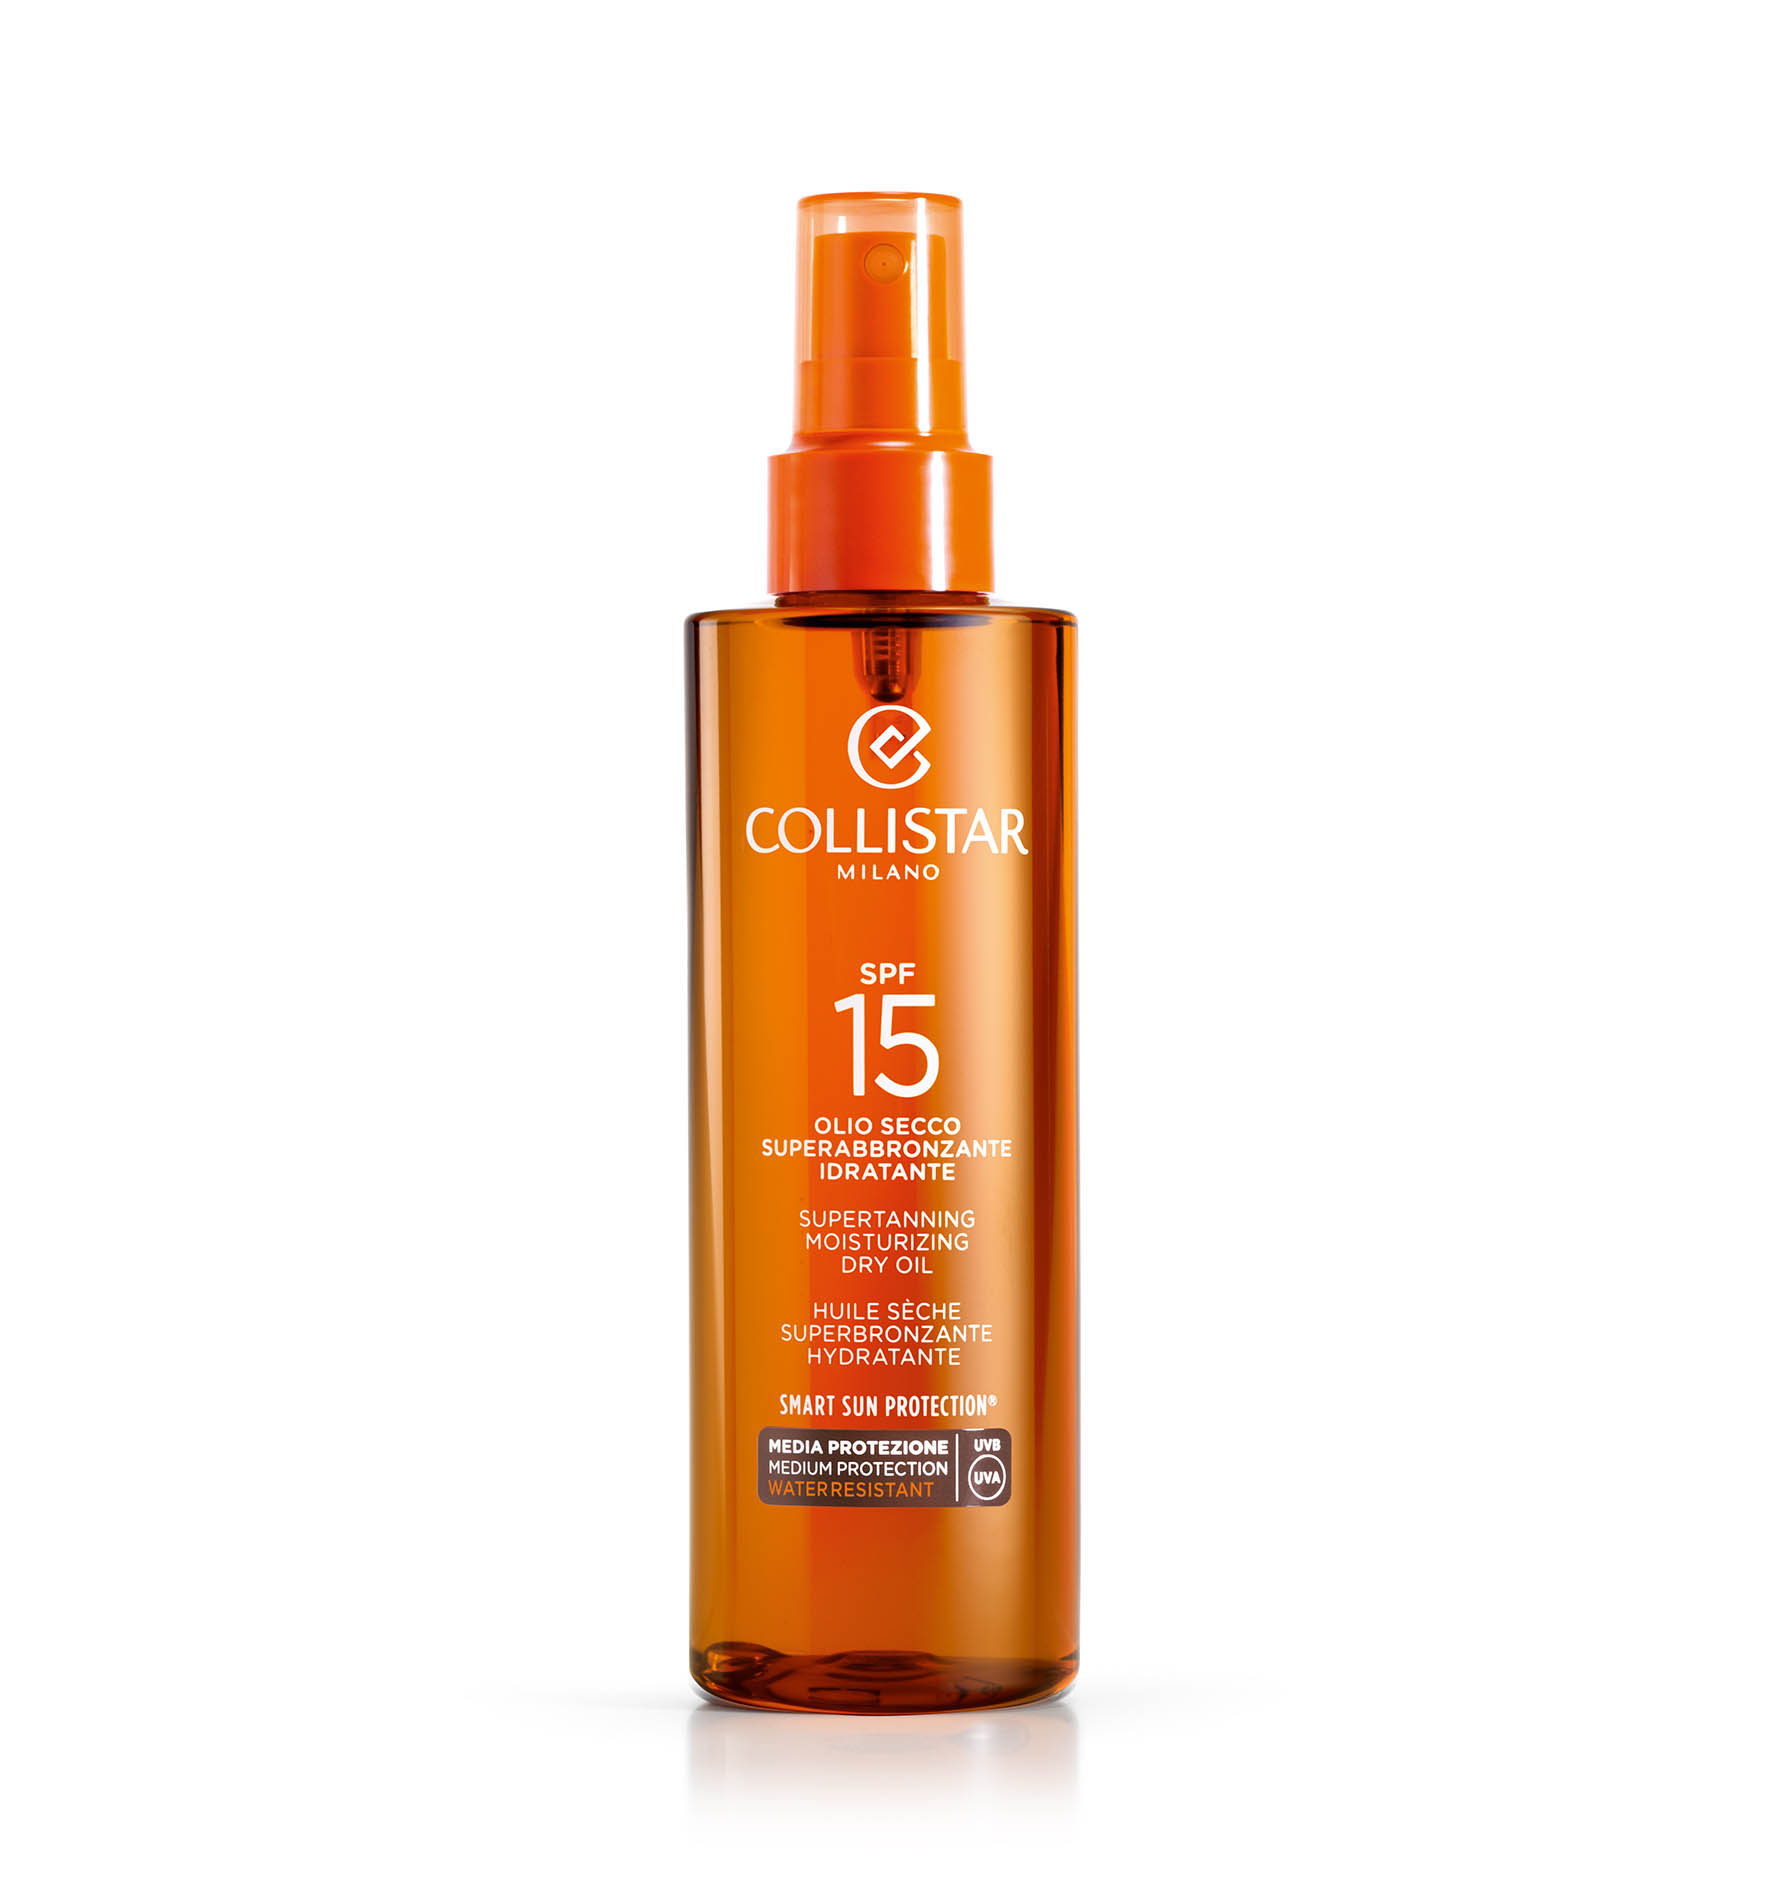 SUPERTANNING MOISTURIZING DRY OIL SPF 15 - PROTECTION | Collistar - Shop Online Ufficiale